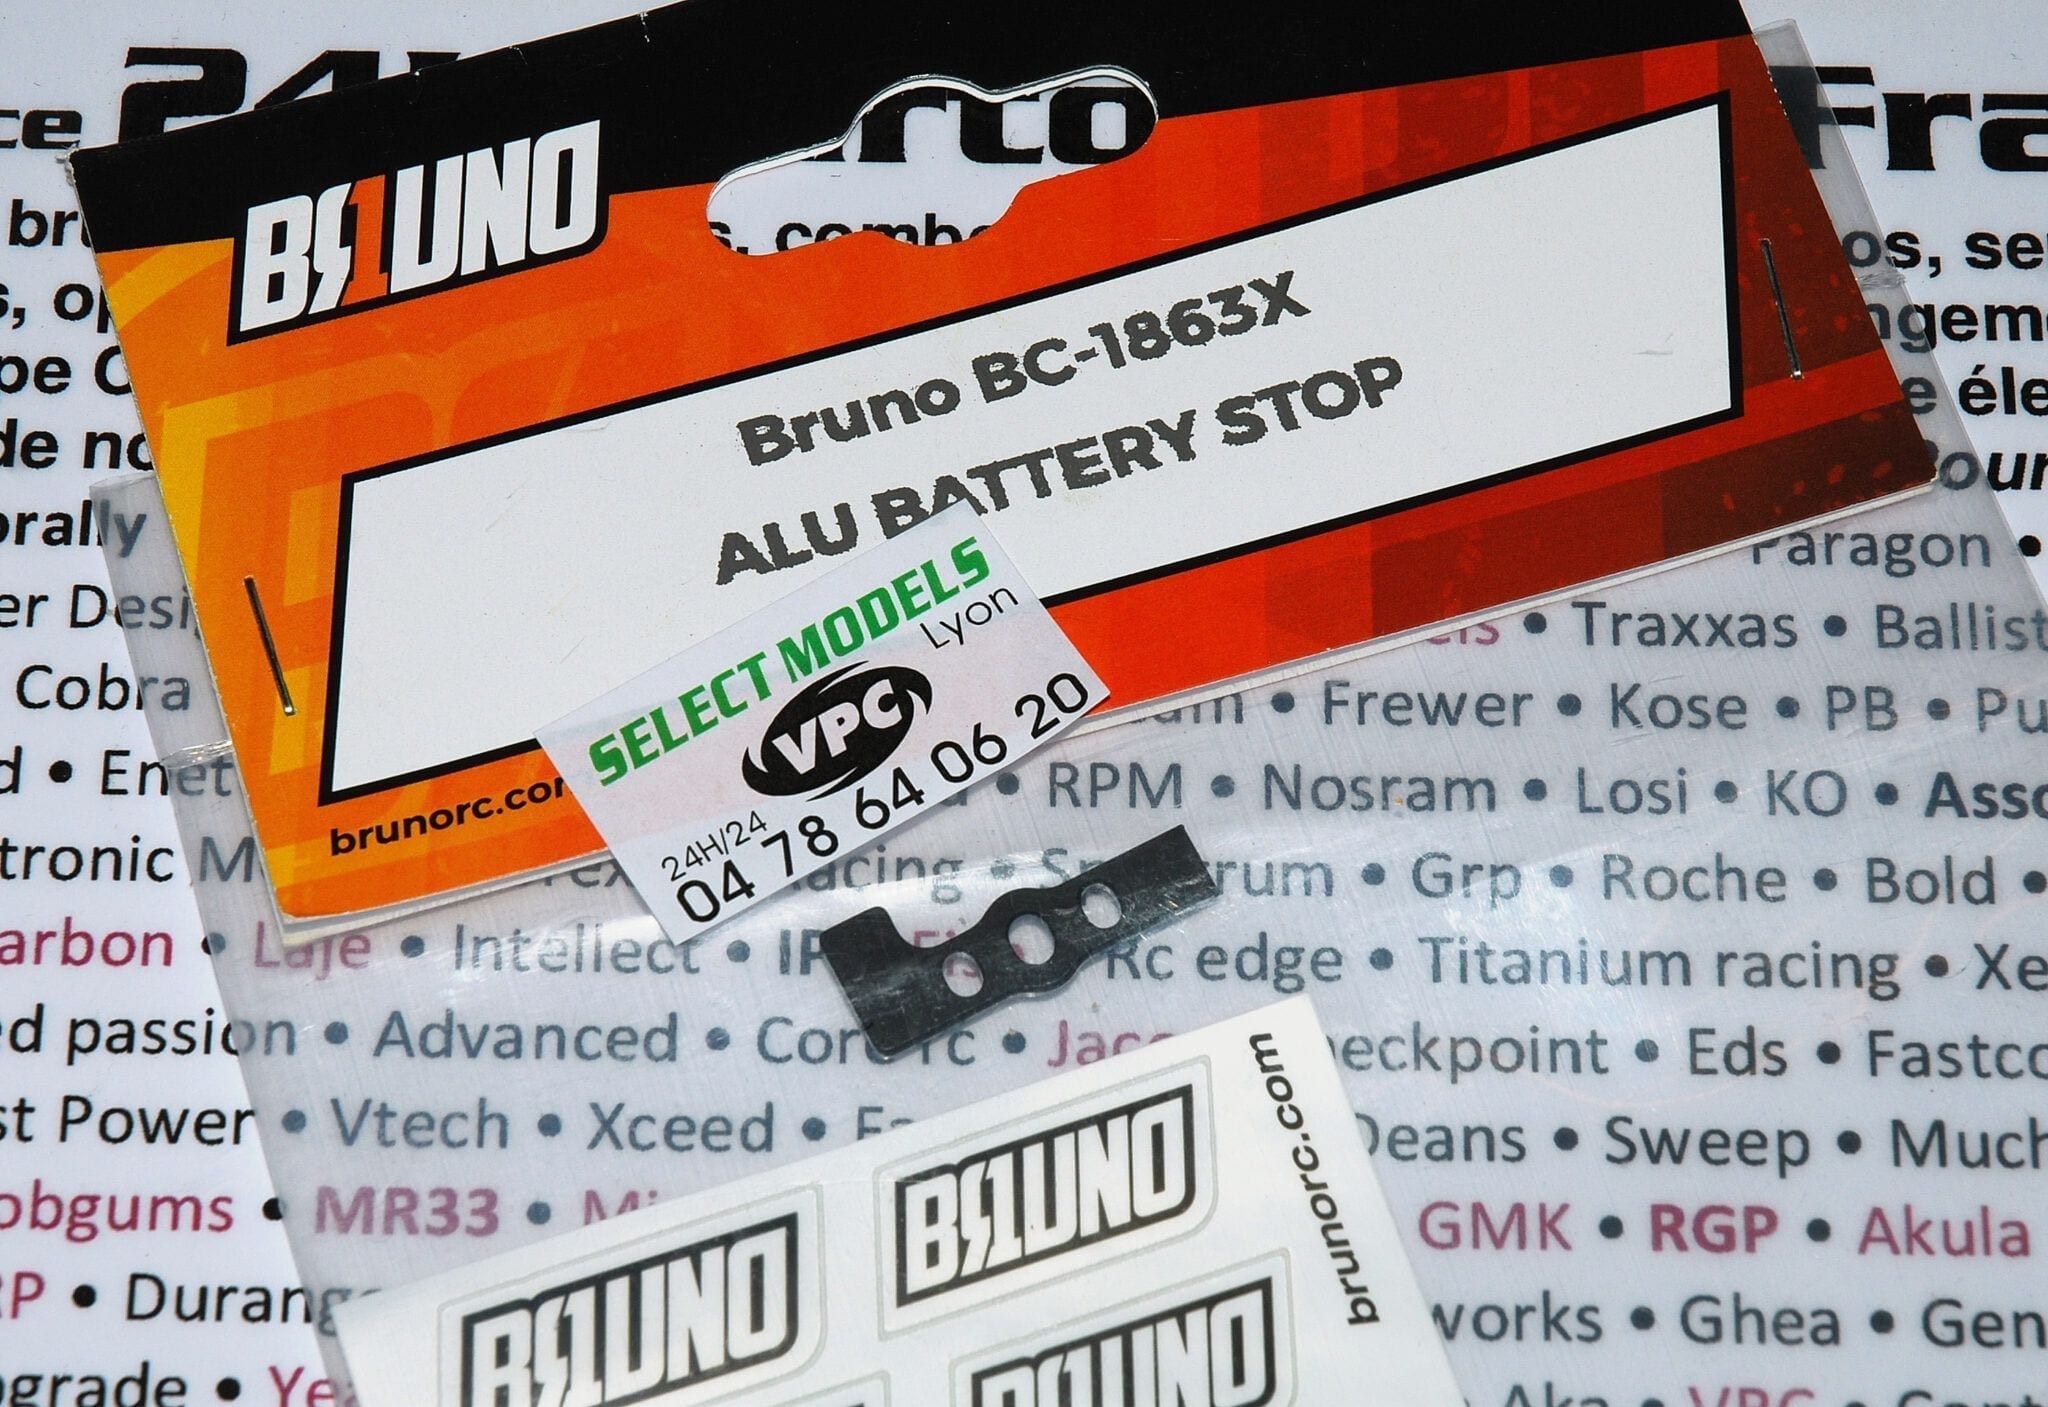 Alu battery stop Bruno rc pour Xray T4